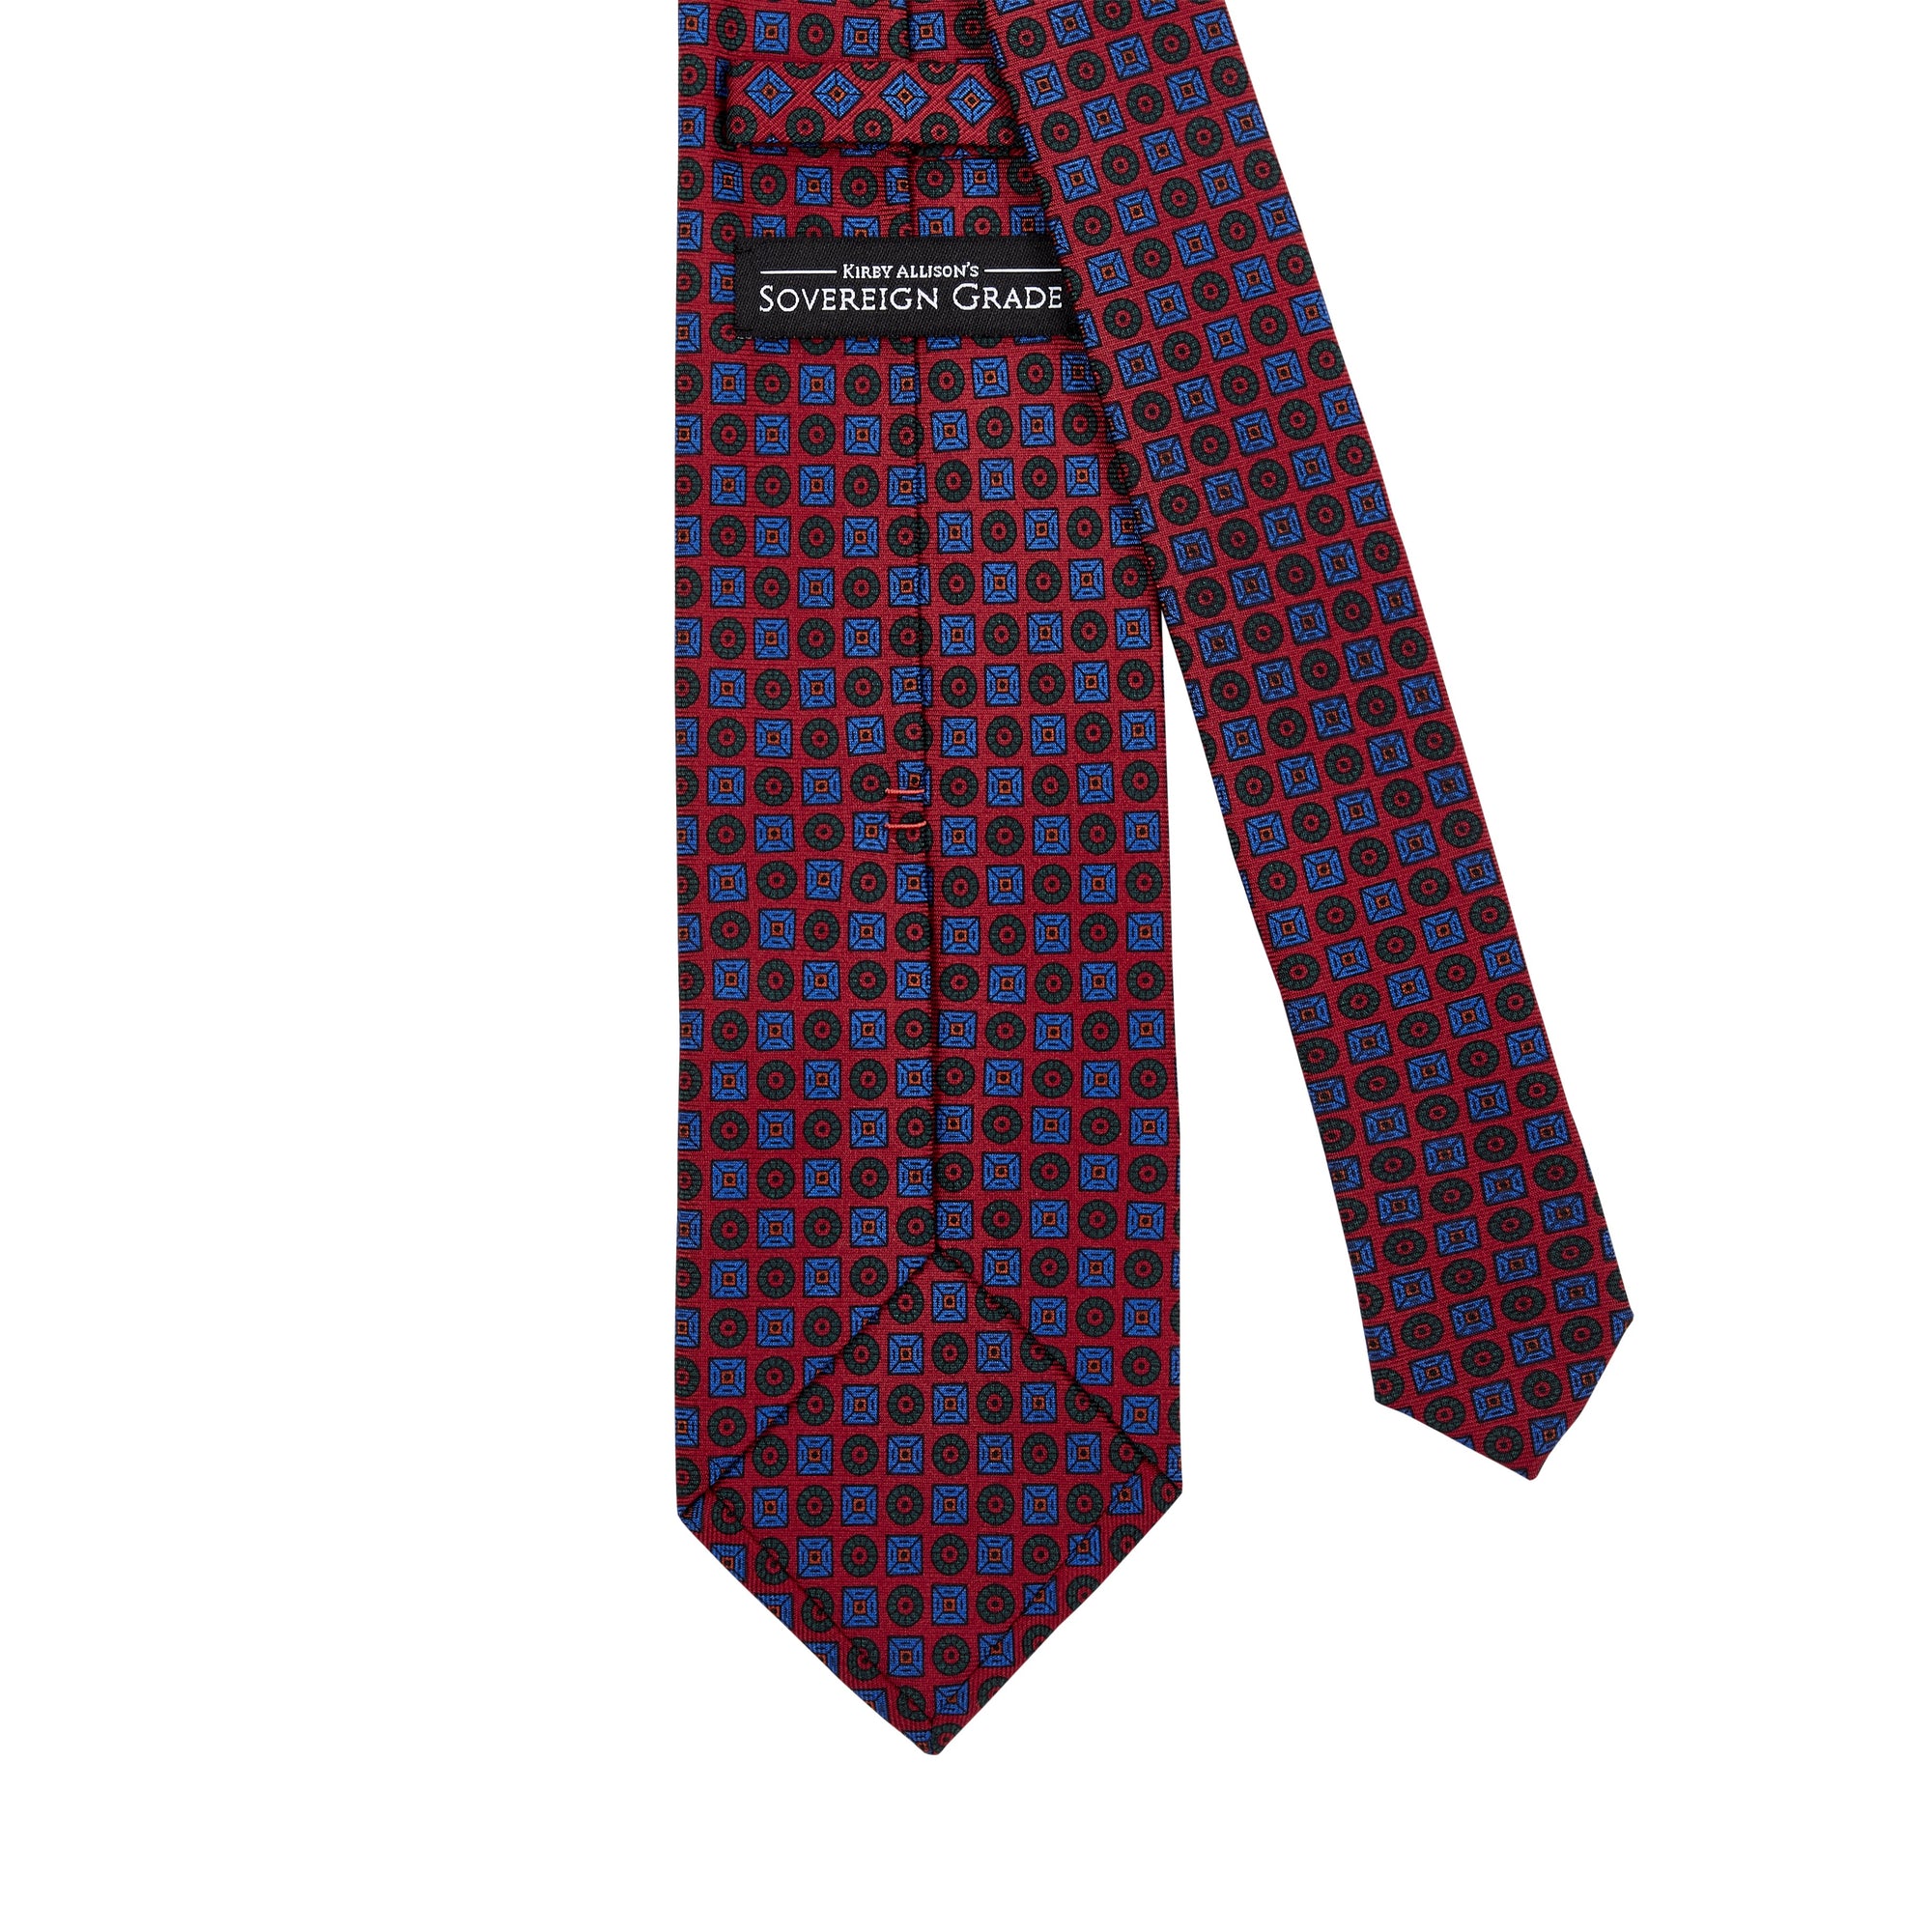 A Sovereign Grade Rust Ancient Madder Tie from KirbyAllison.com with a geometric pattern.